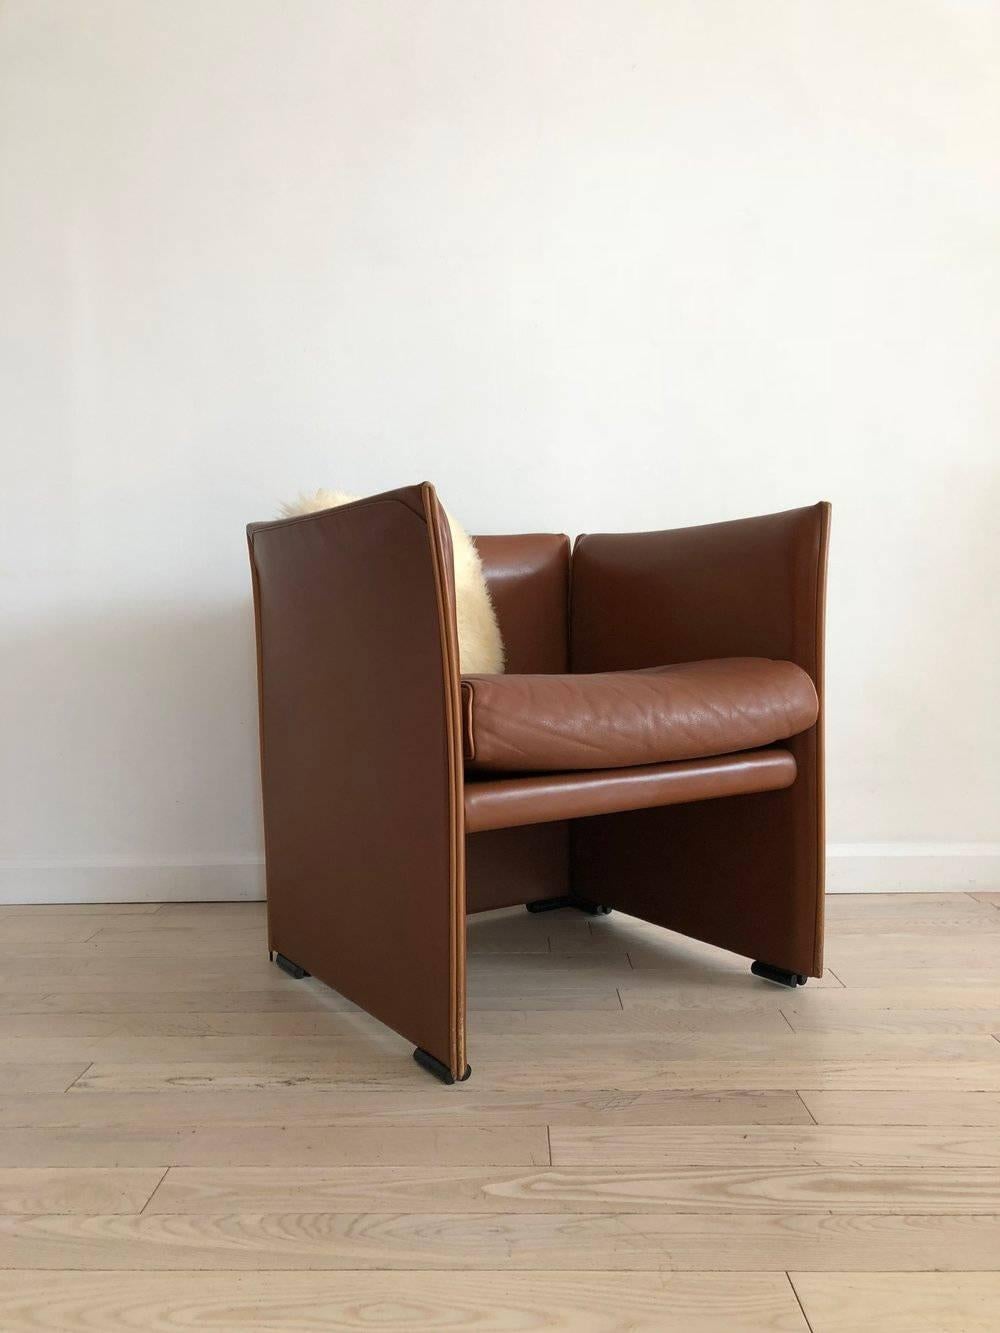 1976 401 Break Chair by Mario Bellini for Cassina, Brown Leather 1